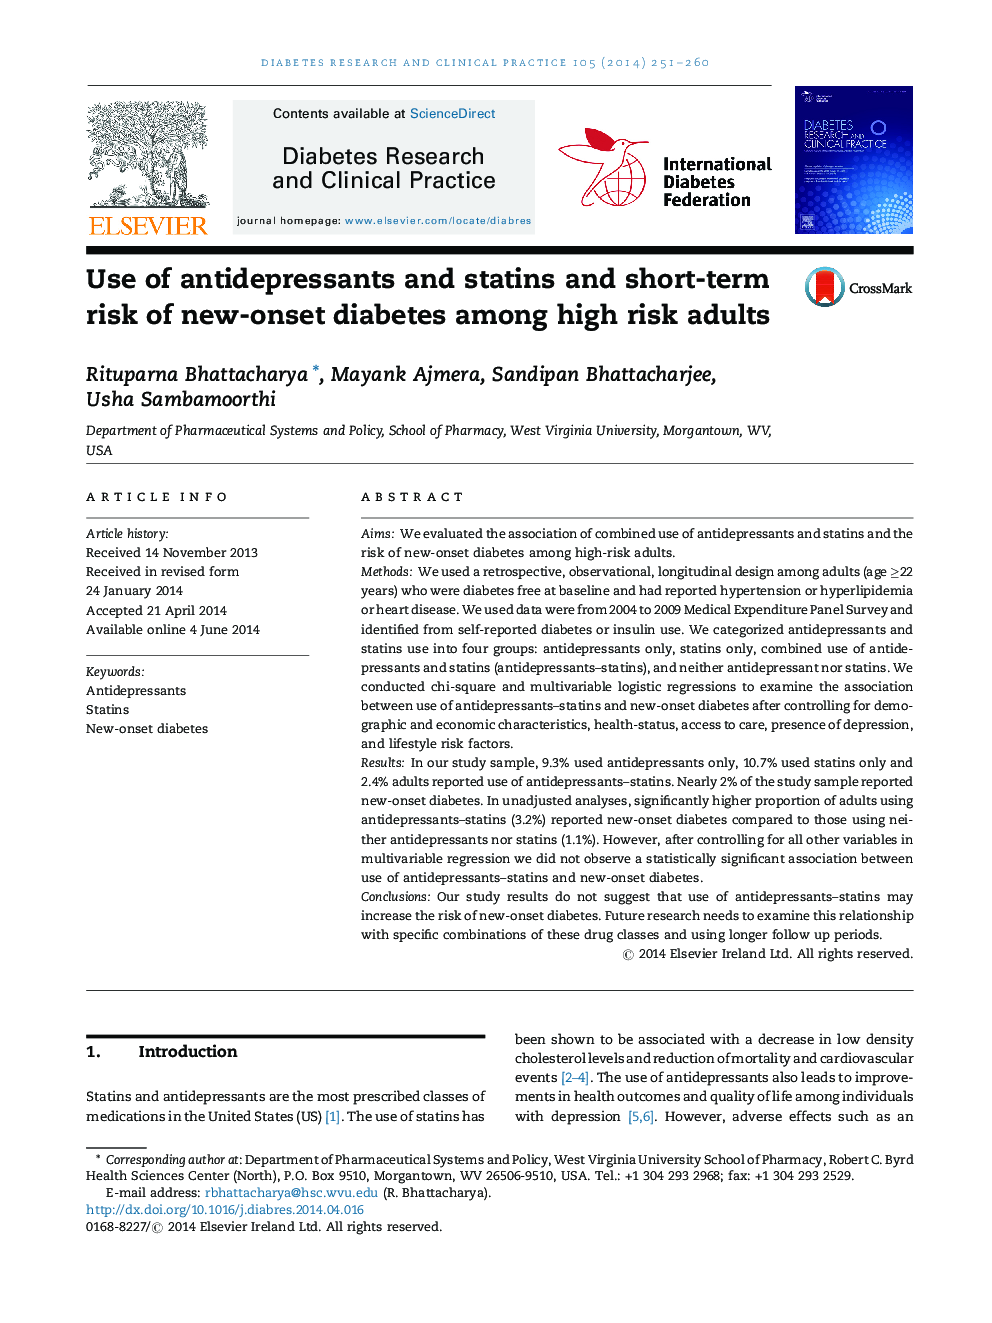 Use of antidepressants and statins and short-term risk of new-onset diabetes among high risk adults